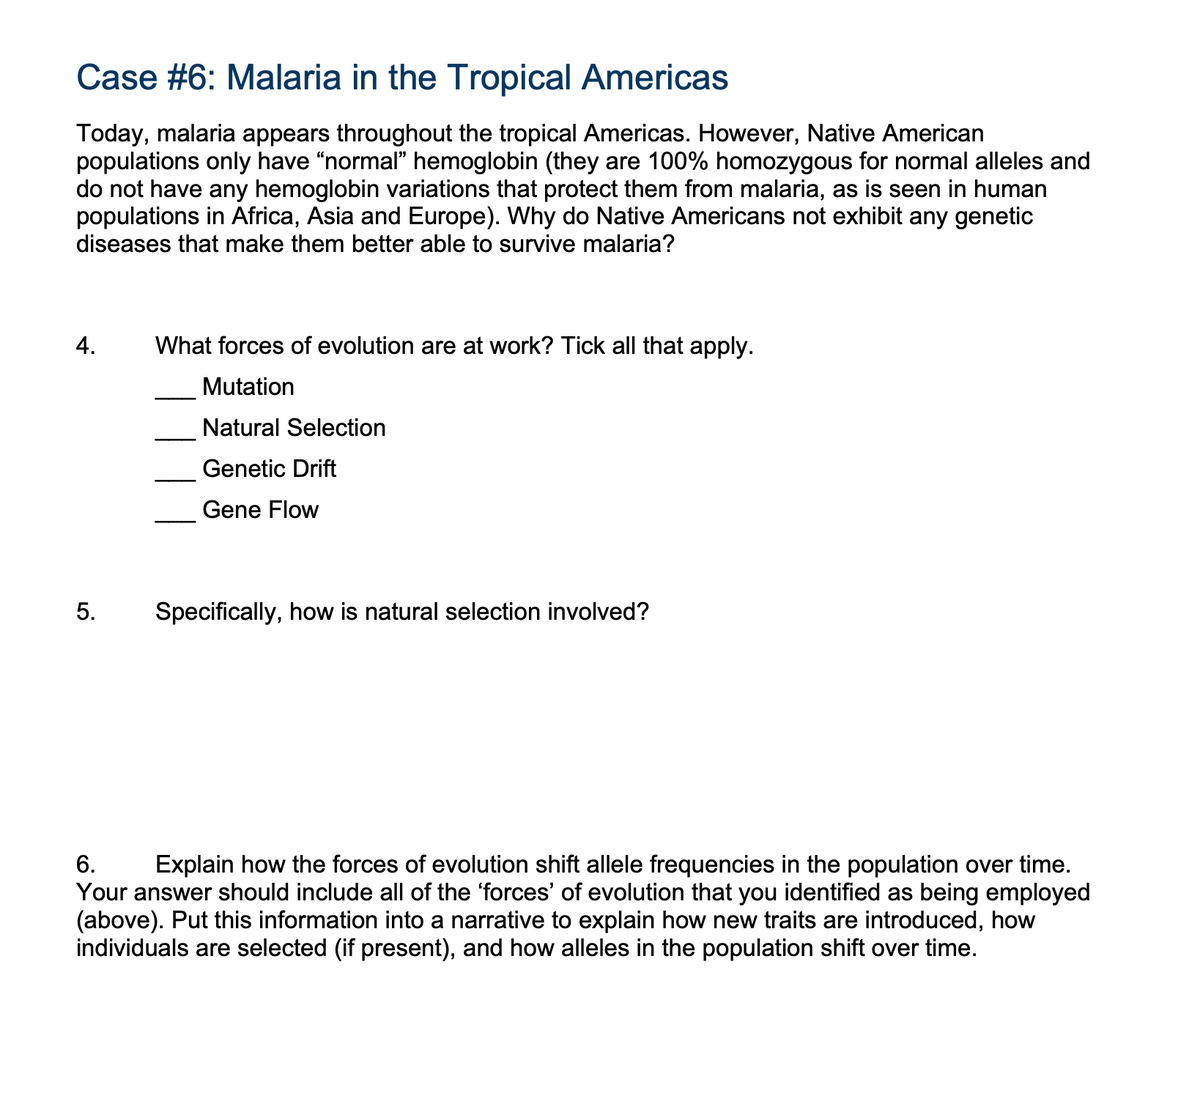 Case #6: Malaria in the Tropical Americas
Today, malaria appears throughout the tropical Americas. However, Native American
populations only have "normal" hemoglobin (they are 100% homozygous for normal alleles and
do not have any hemoglobin variations that protect them from malaria, as is seen in human
populations in Africa, Asia and Europe). Why do Native Americans not exhibit any genetic
diseases that make them better able to survive malaria?
4.
5.
What forces of evolution are at work? Tick all that apply.
Mutation
Natural Selection
Genetic Drift
Gene Flow
Specifically, how is natural selection involved?
6.
Explain how the forces of evolution shift allele frequencies in the population over time.
Your answer should include all of the 'forces' of evolution that you identified as being employed
(above). Put this information into a narrative to explain how new traits are introduced, how
individuals are selected (if present), and how alleles in the population shift over time.